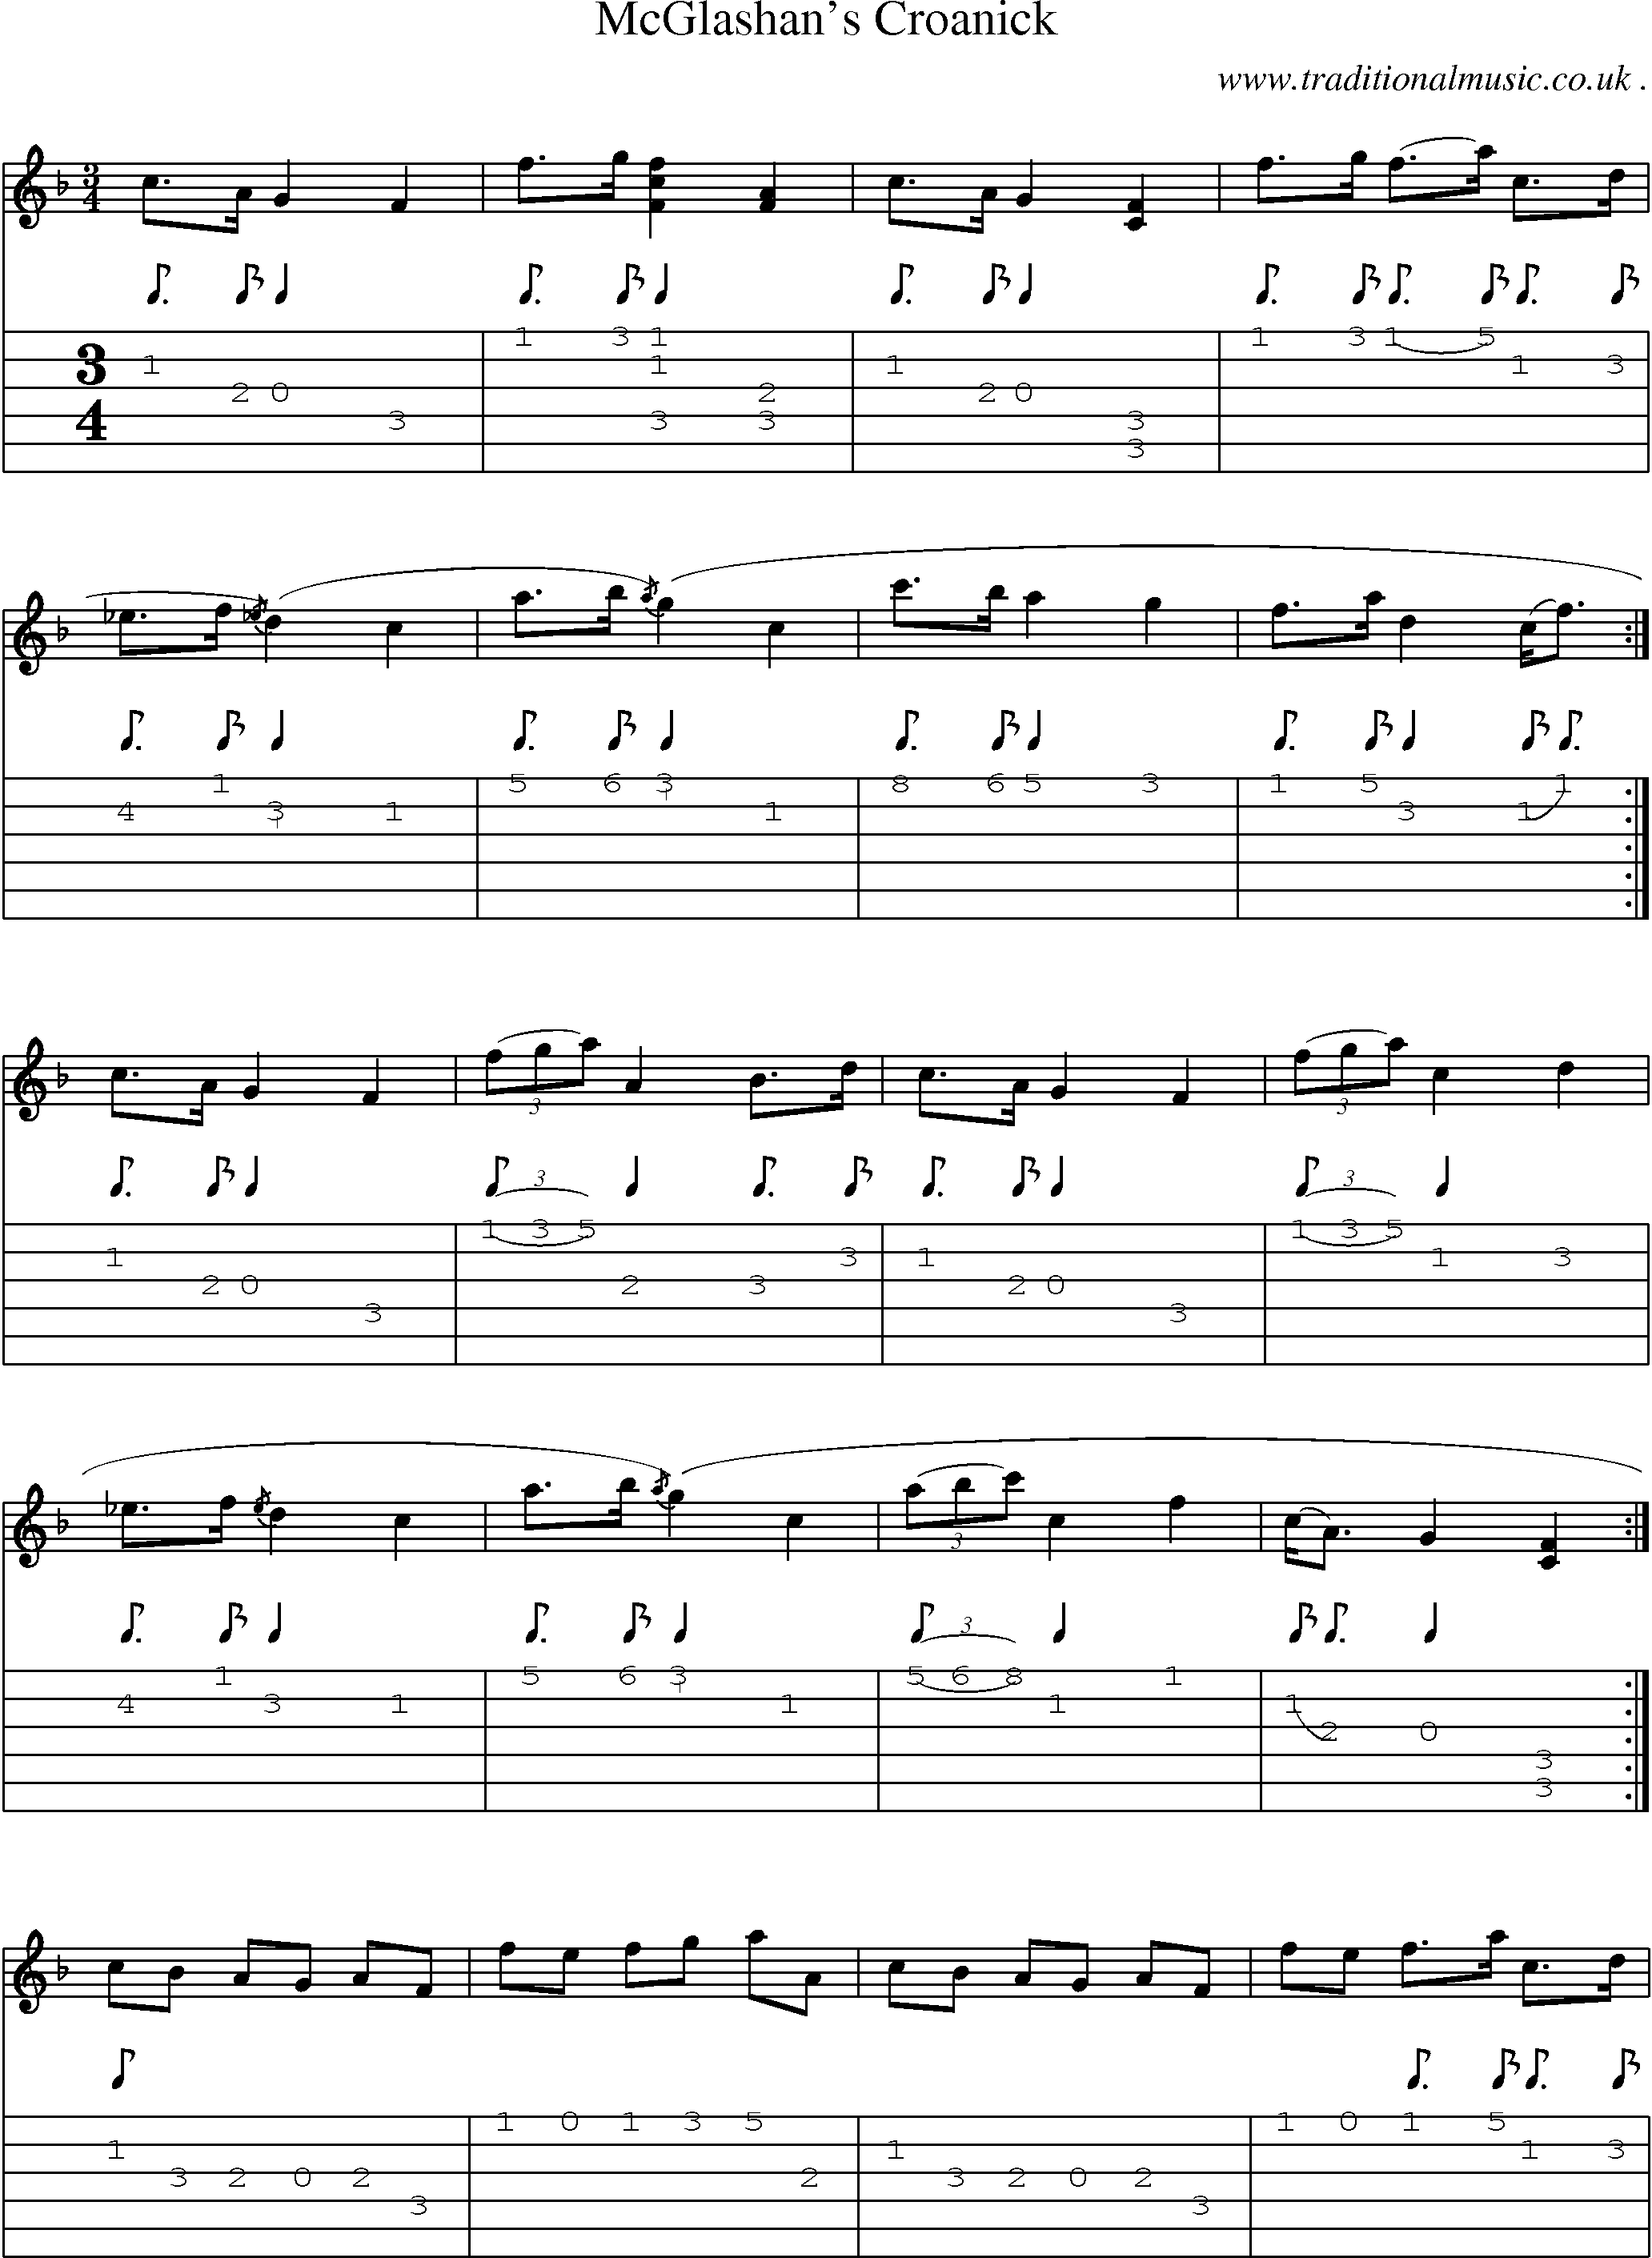 Sheet-music  score, Chords and Guitar Tabs for Mcglashans Croanick